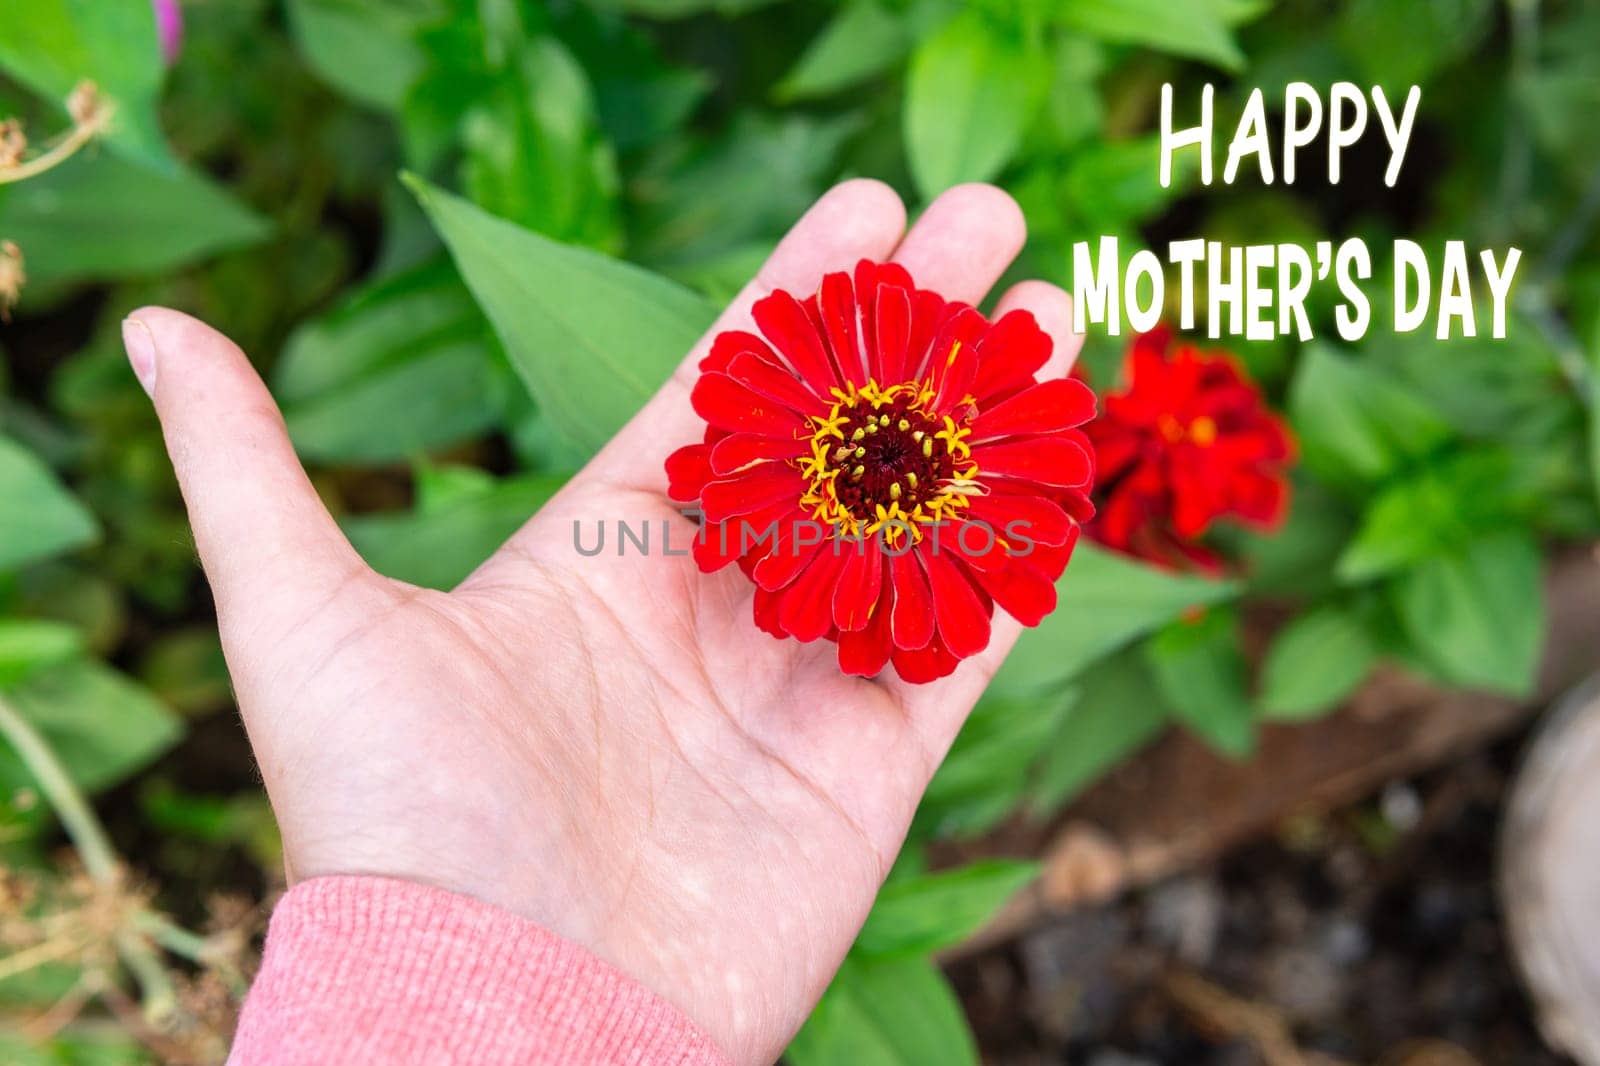 Zinnia bloom, with a heartfelt Happy Mothers Day wish overlaid, captures the essence of appreciation and love. by darksoul72